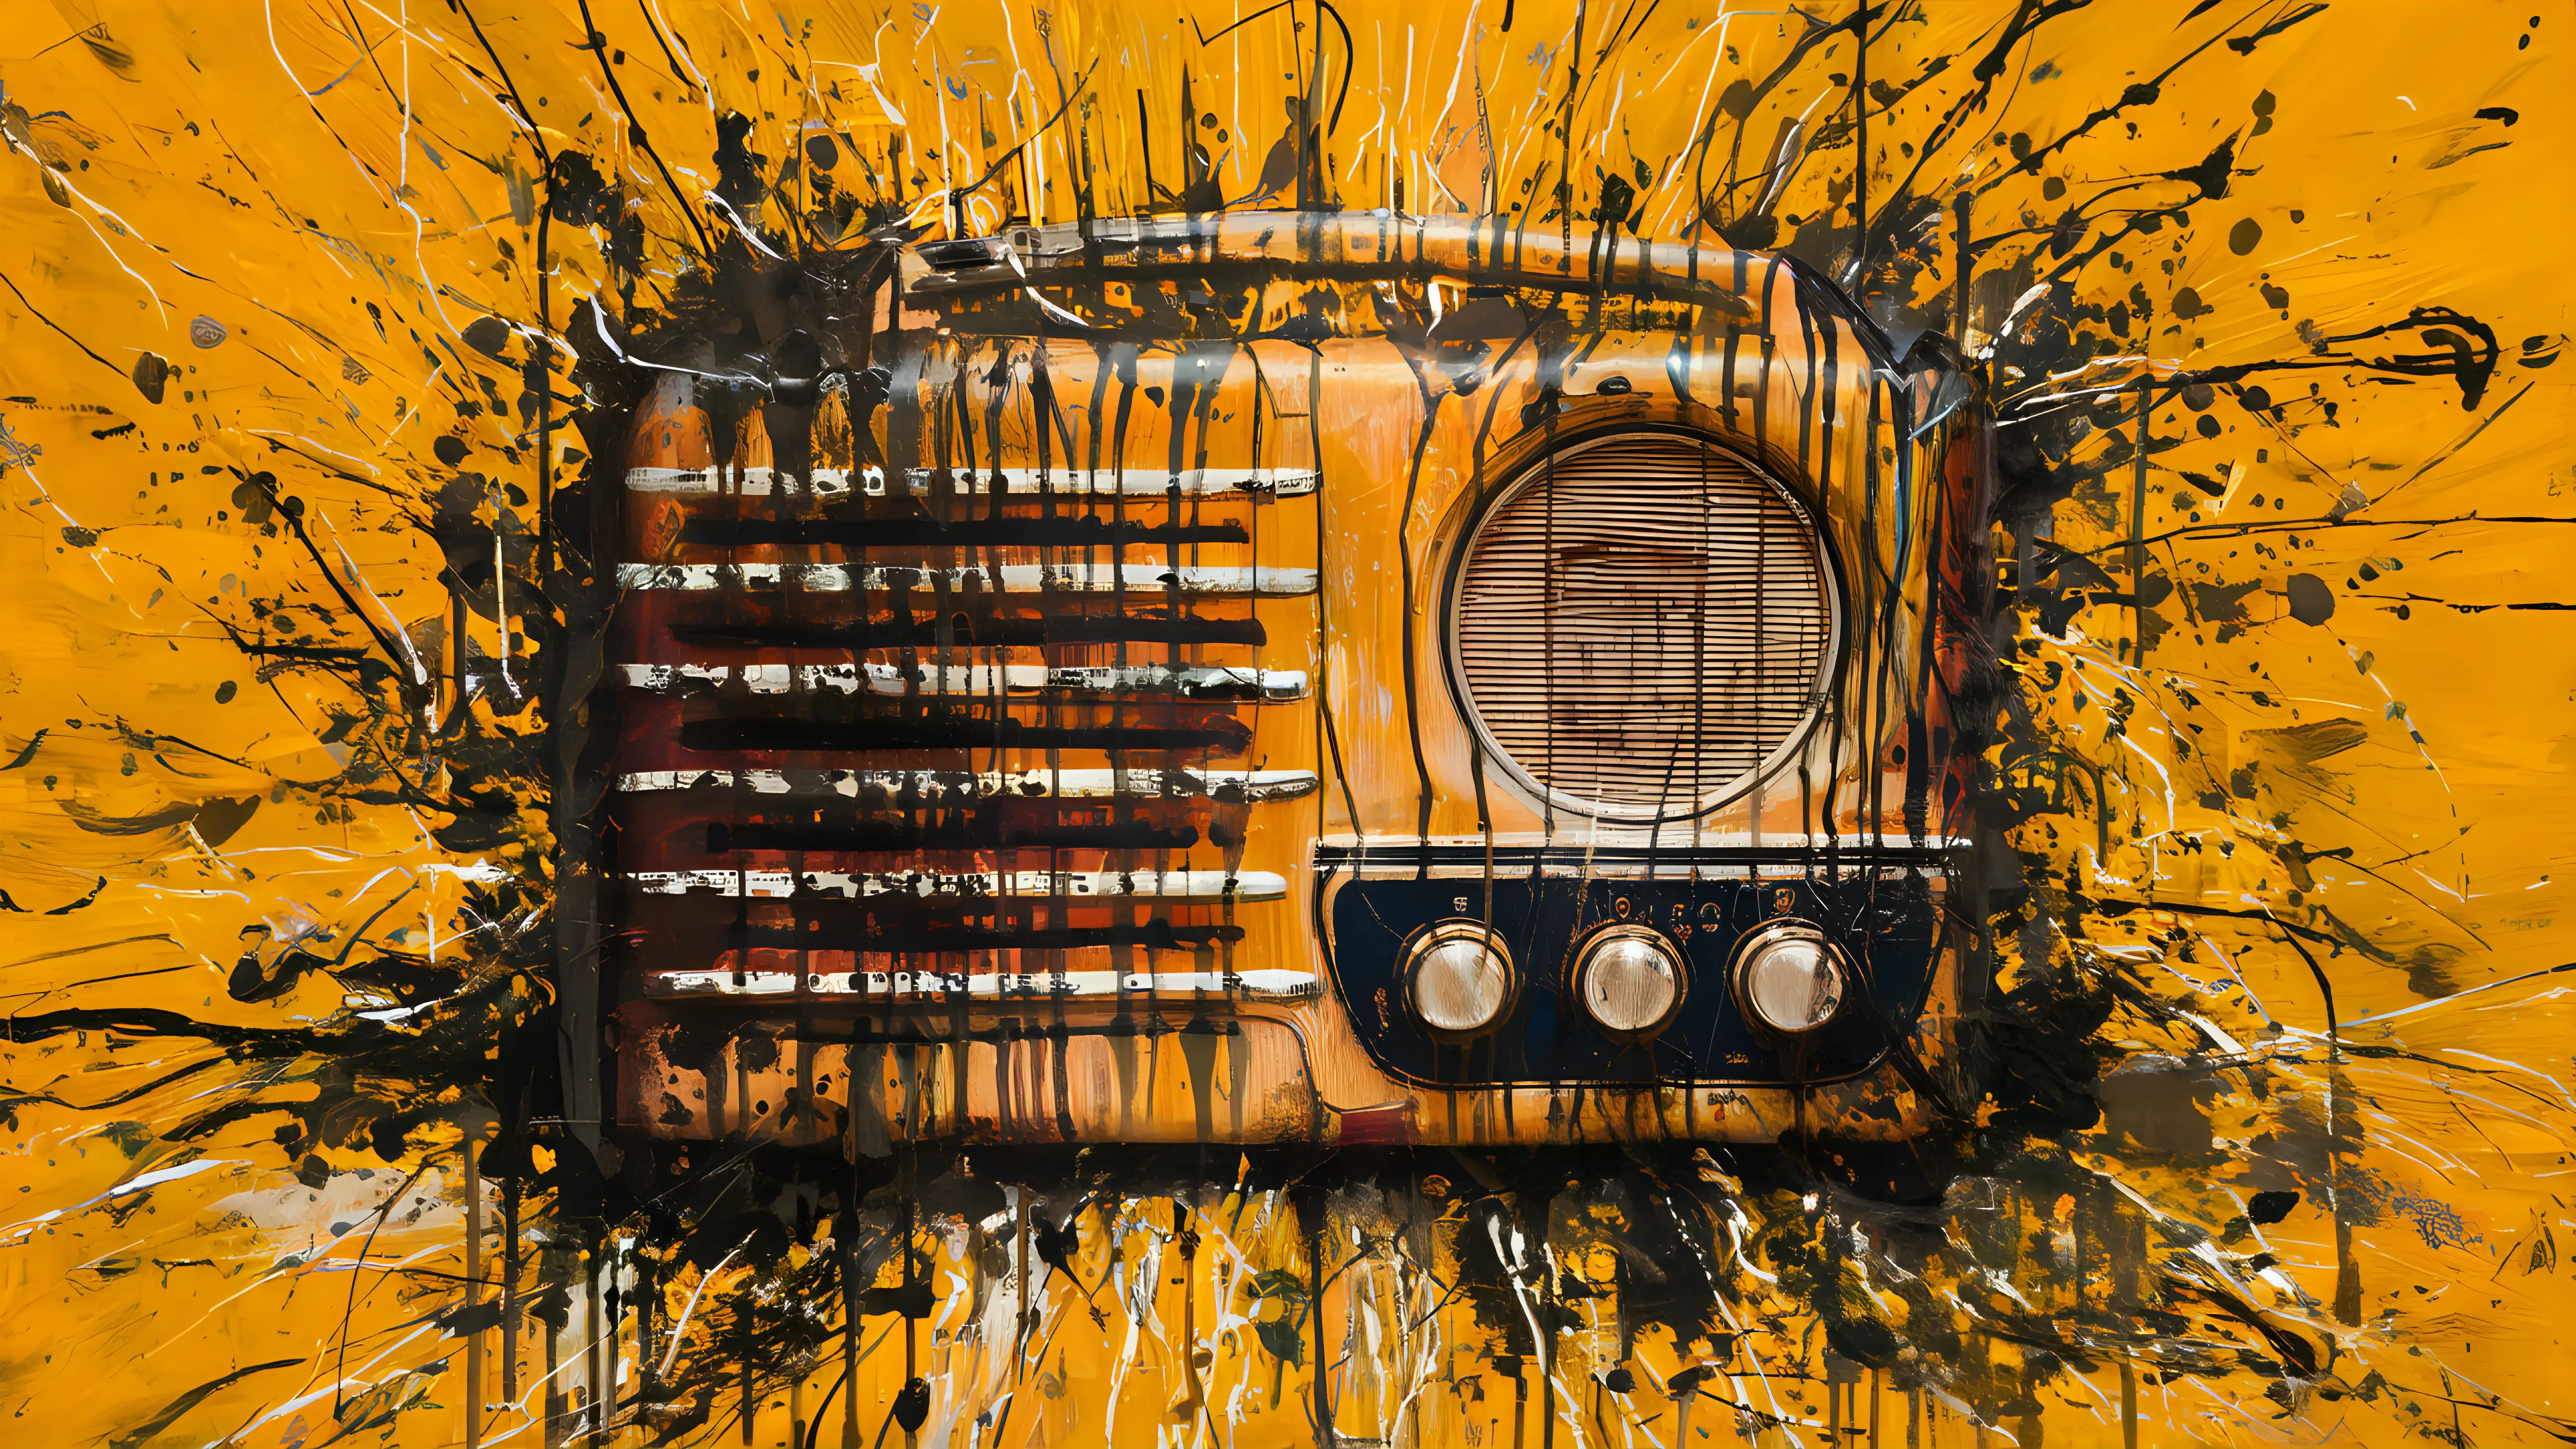 Abstract Old Time Radio Art Against Yellow Background